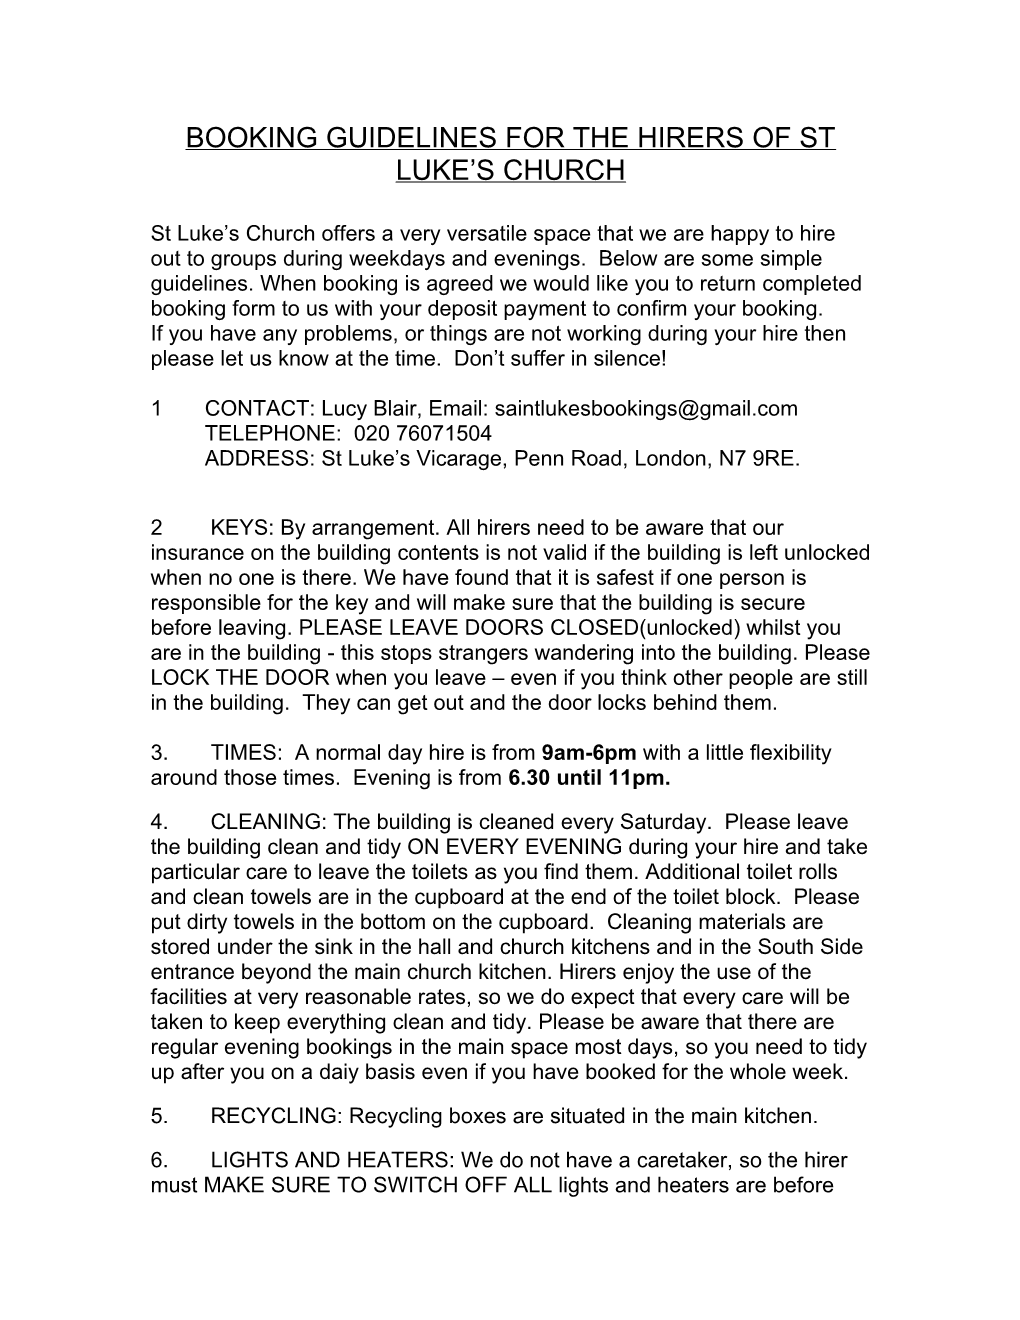 Conditions of Hire for St Luke S Church